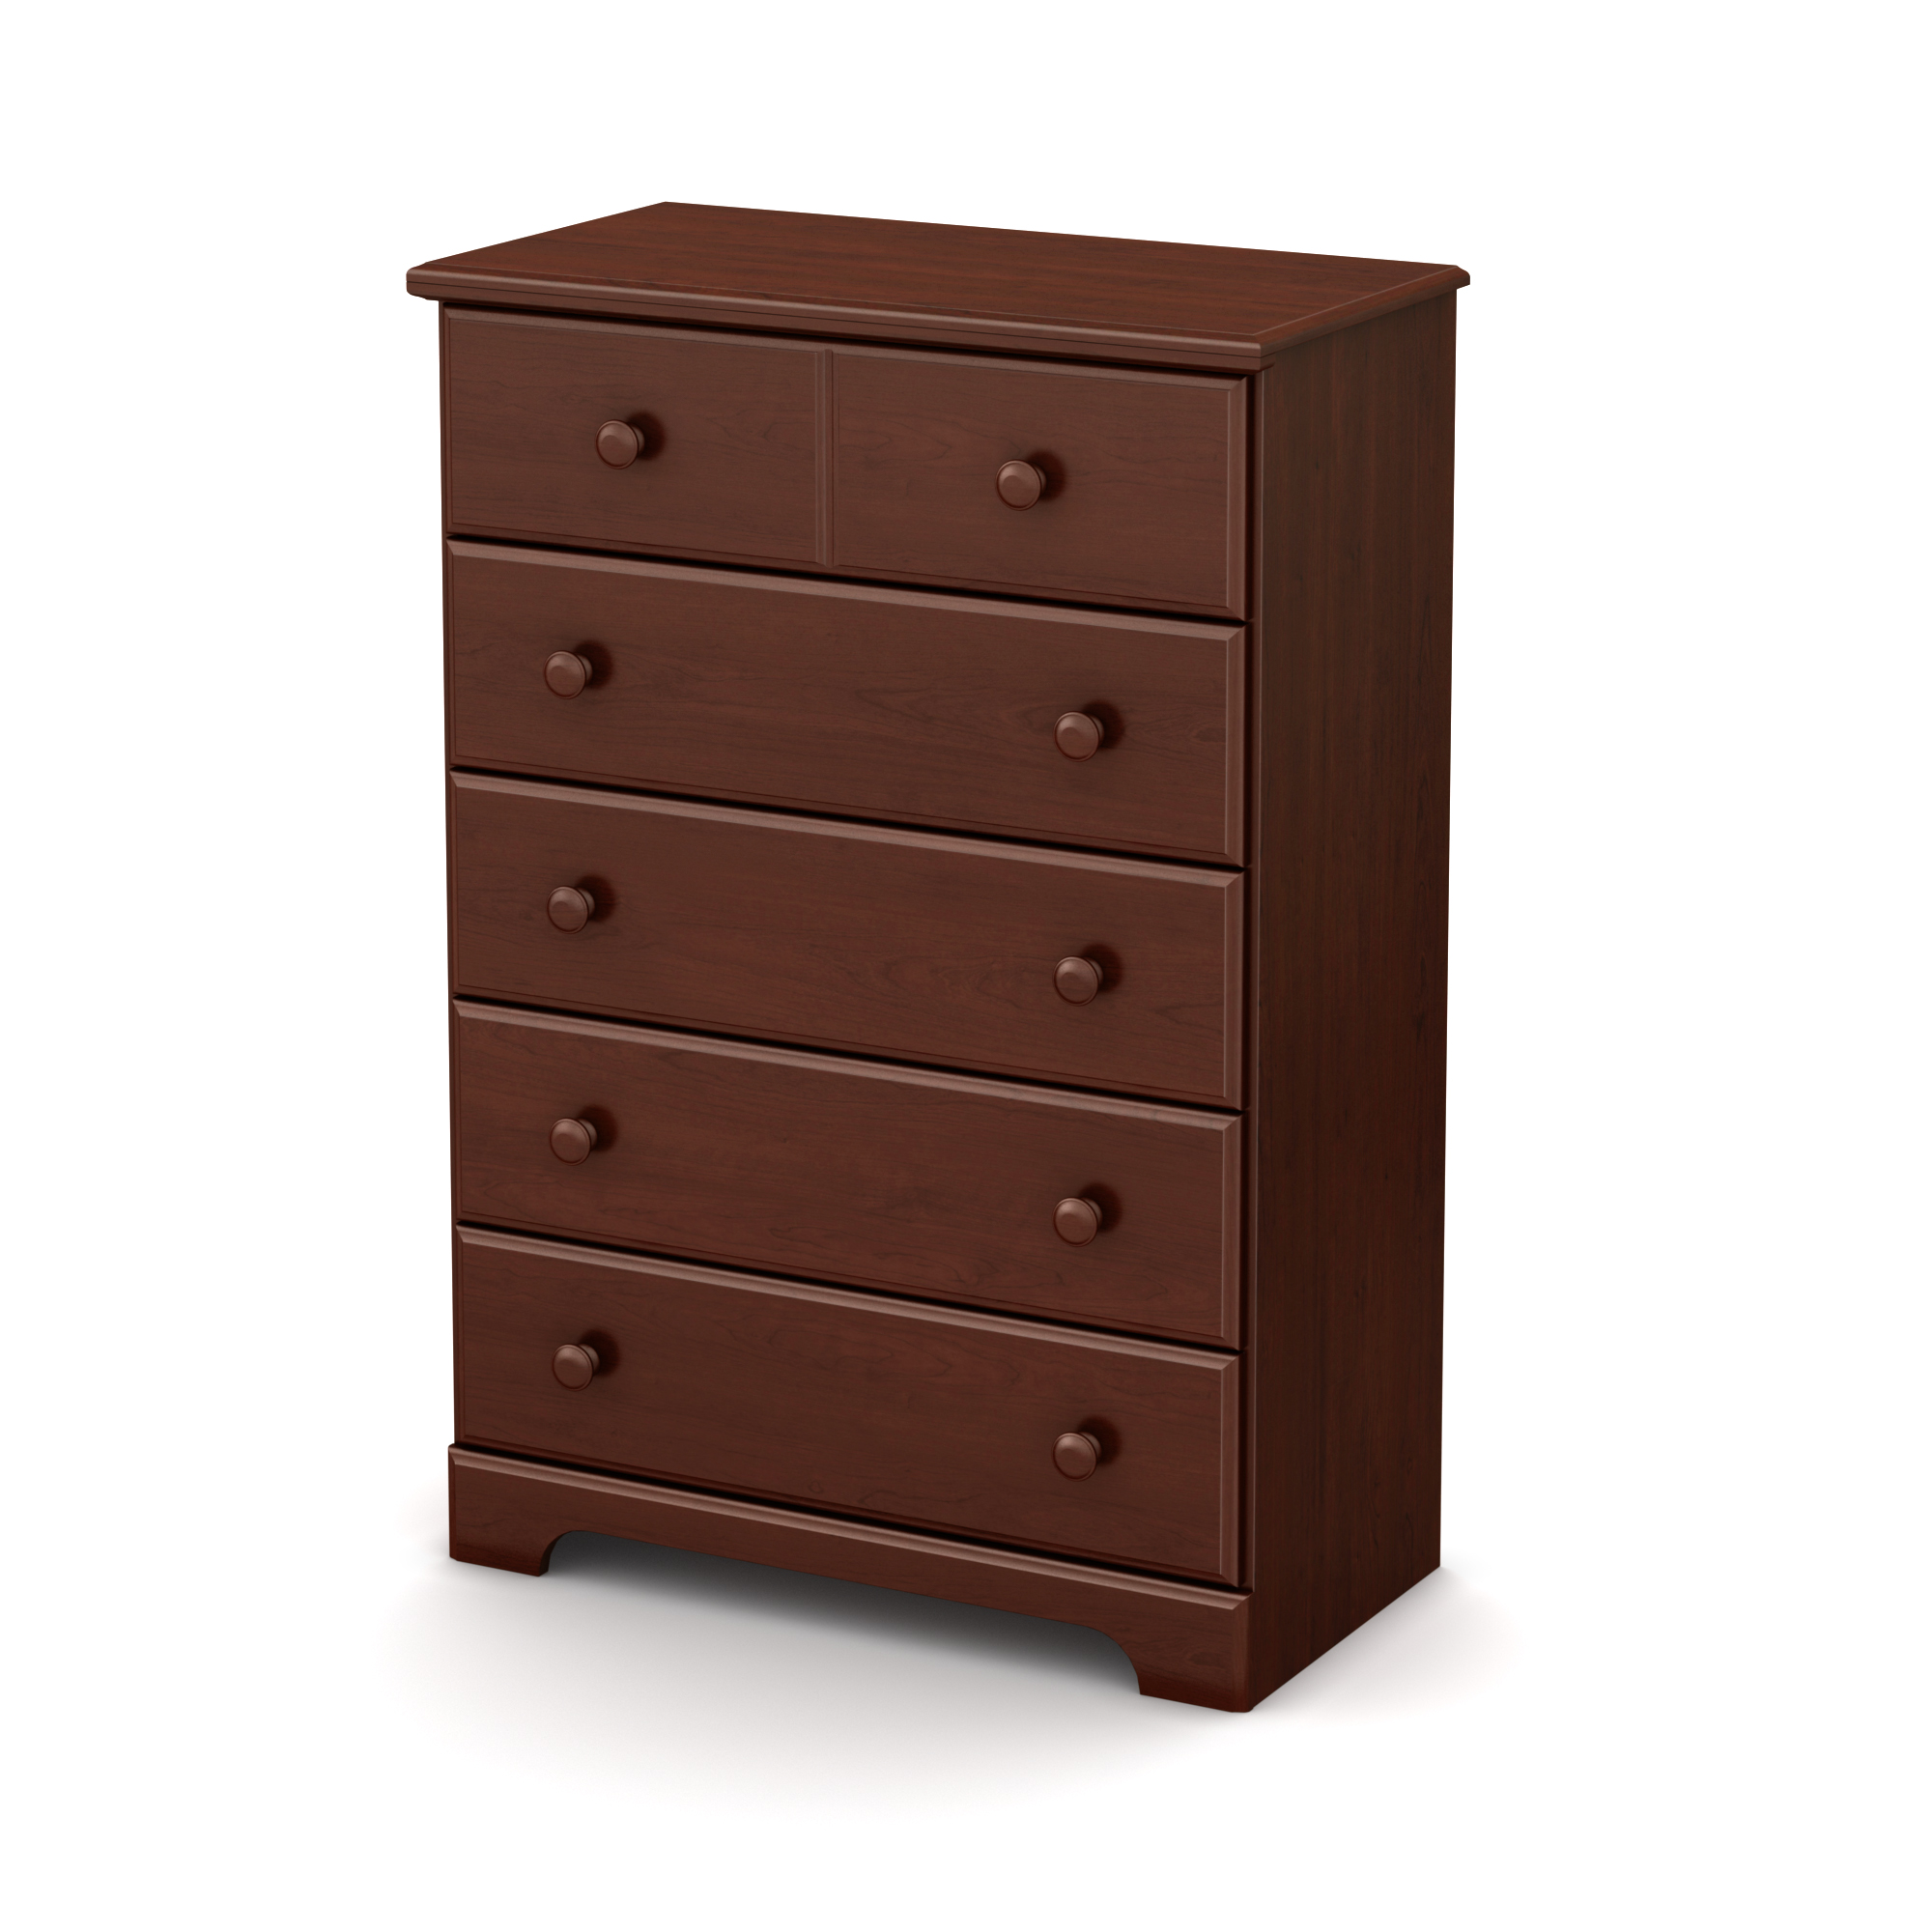 5-drawer chests